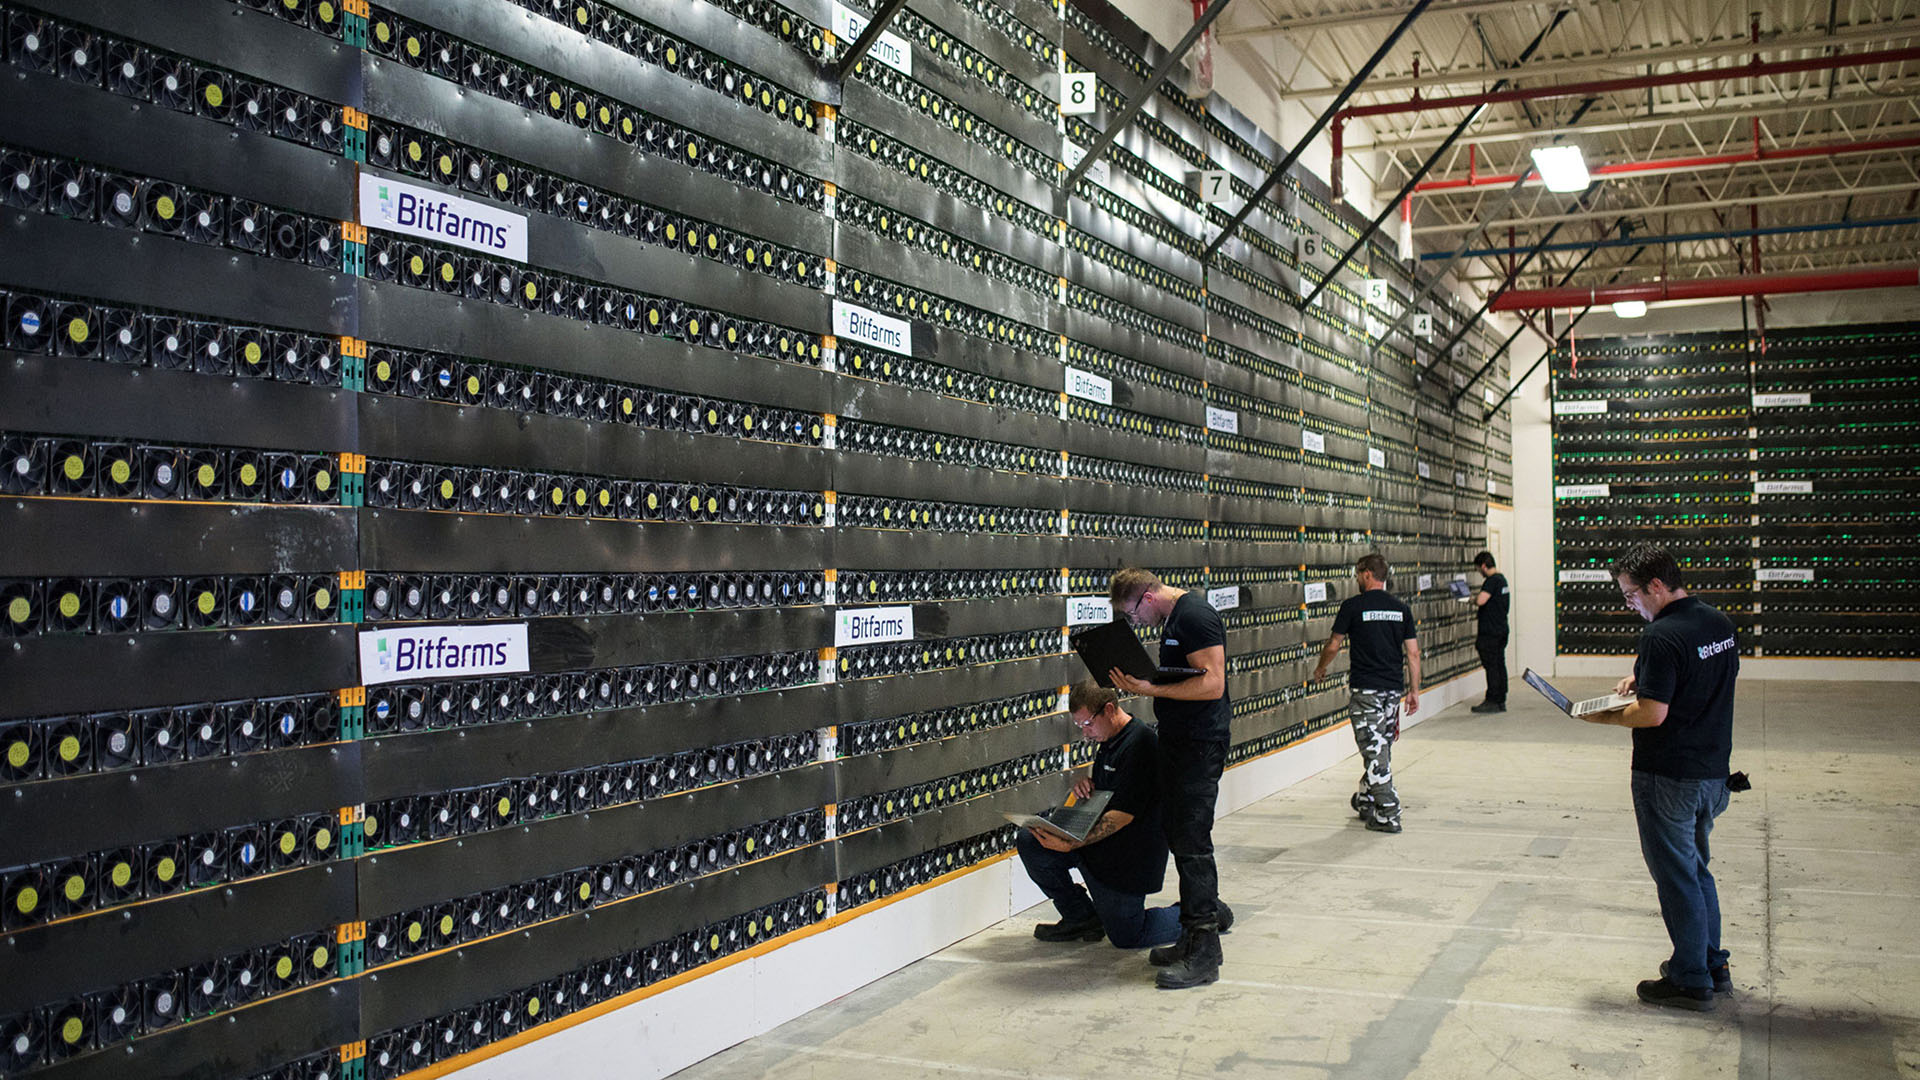 Technicians monitor cryptocurrency mining rigs at a Bitfarms facility in Saint-Hyacinthe, Quebec, Canada, on Thursday, July 26, 2018. Bitcoin has rallied more than 30 percent in July, shrugging off security and regulatory concerns that have plagued the virtual currency for much of this year. Photographer: James MacDonald/Bloomberg